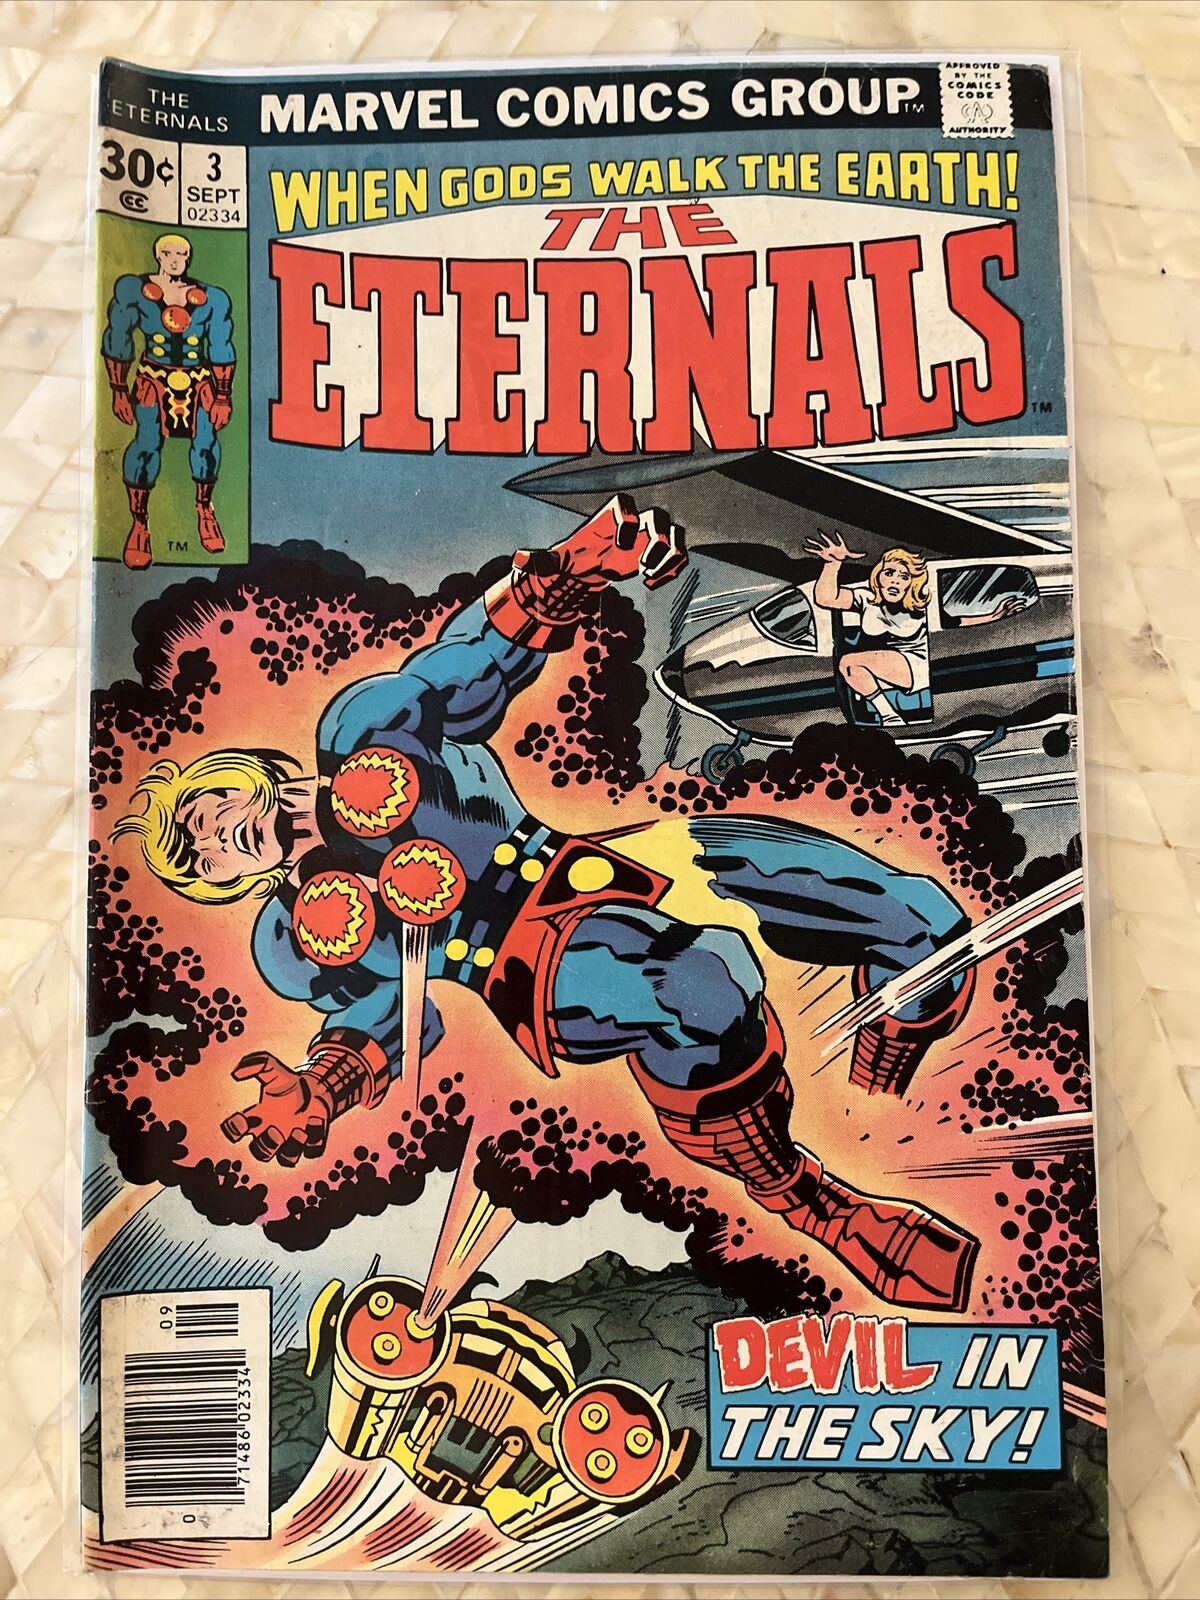 THE ETERNALS #3 1976 JACK KIRBY FIRST APPEARANCE SERSI MARVEL COMICS